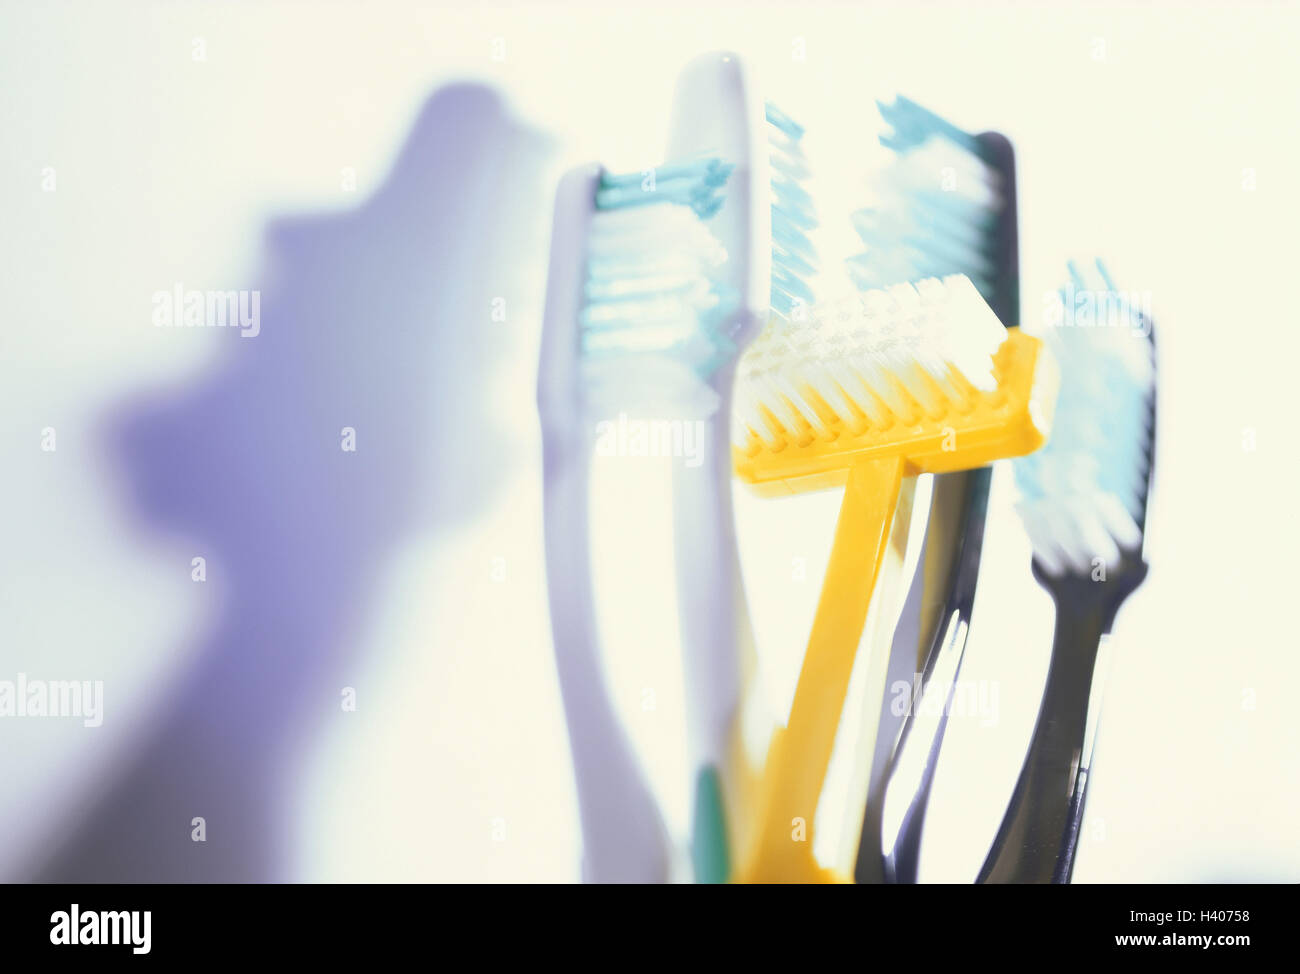 Icon, 'exceptions confirm the rule' - 'Think across - crosswise clean', toothbrushes saying, toothbrush, blur, cog care, oral hygiene, hygiene, oral hygiene, cog cleaning, accessories, five, Still life Stock Photo